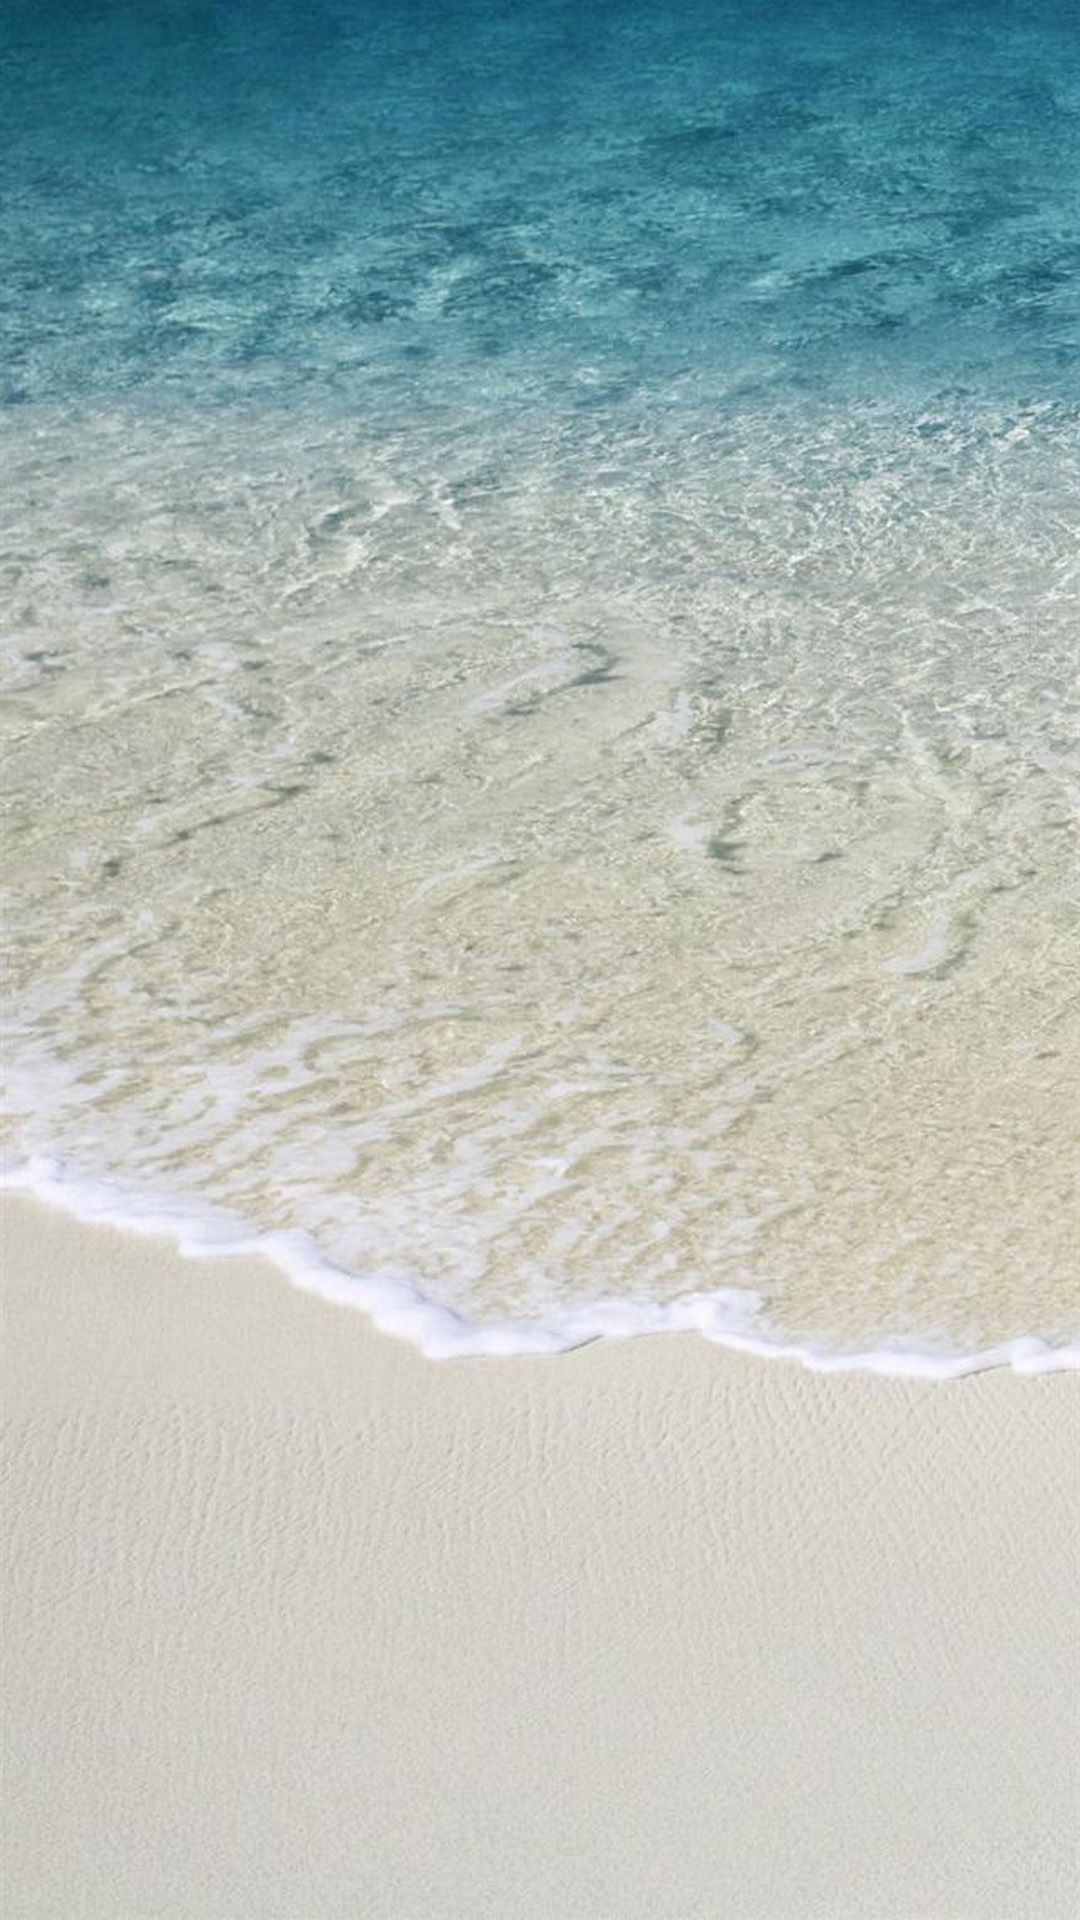 NATURAL IPHONE WALLPAPERS FOR THE NATURE LOVERS.. Style. Beach wallpaper iphone, Beach wallpaper, iPhone wallpaper ocean